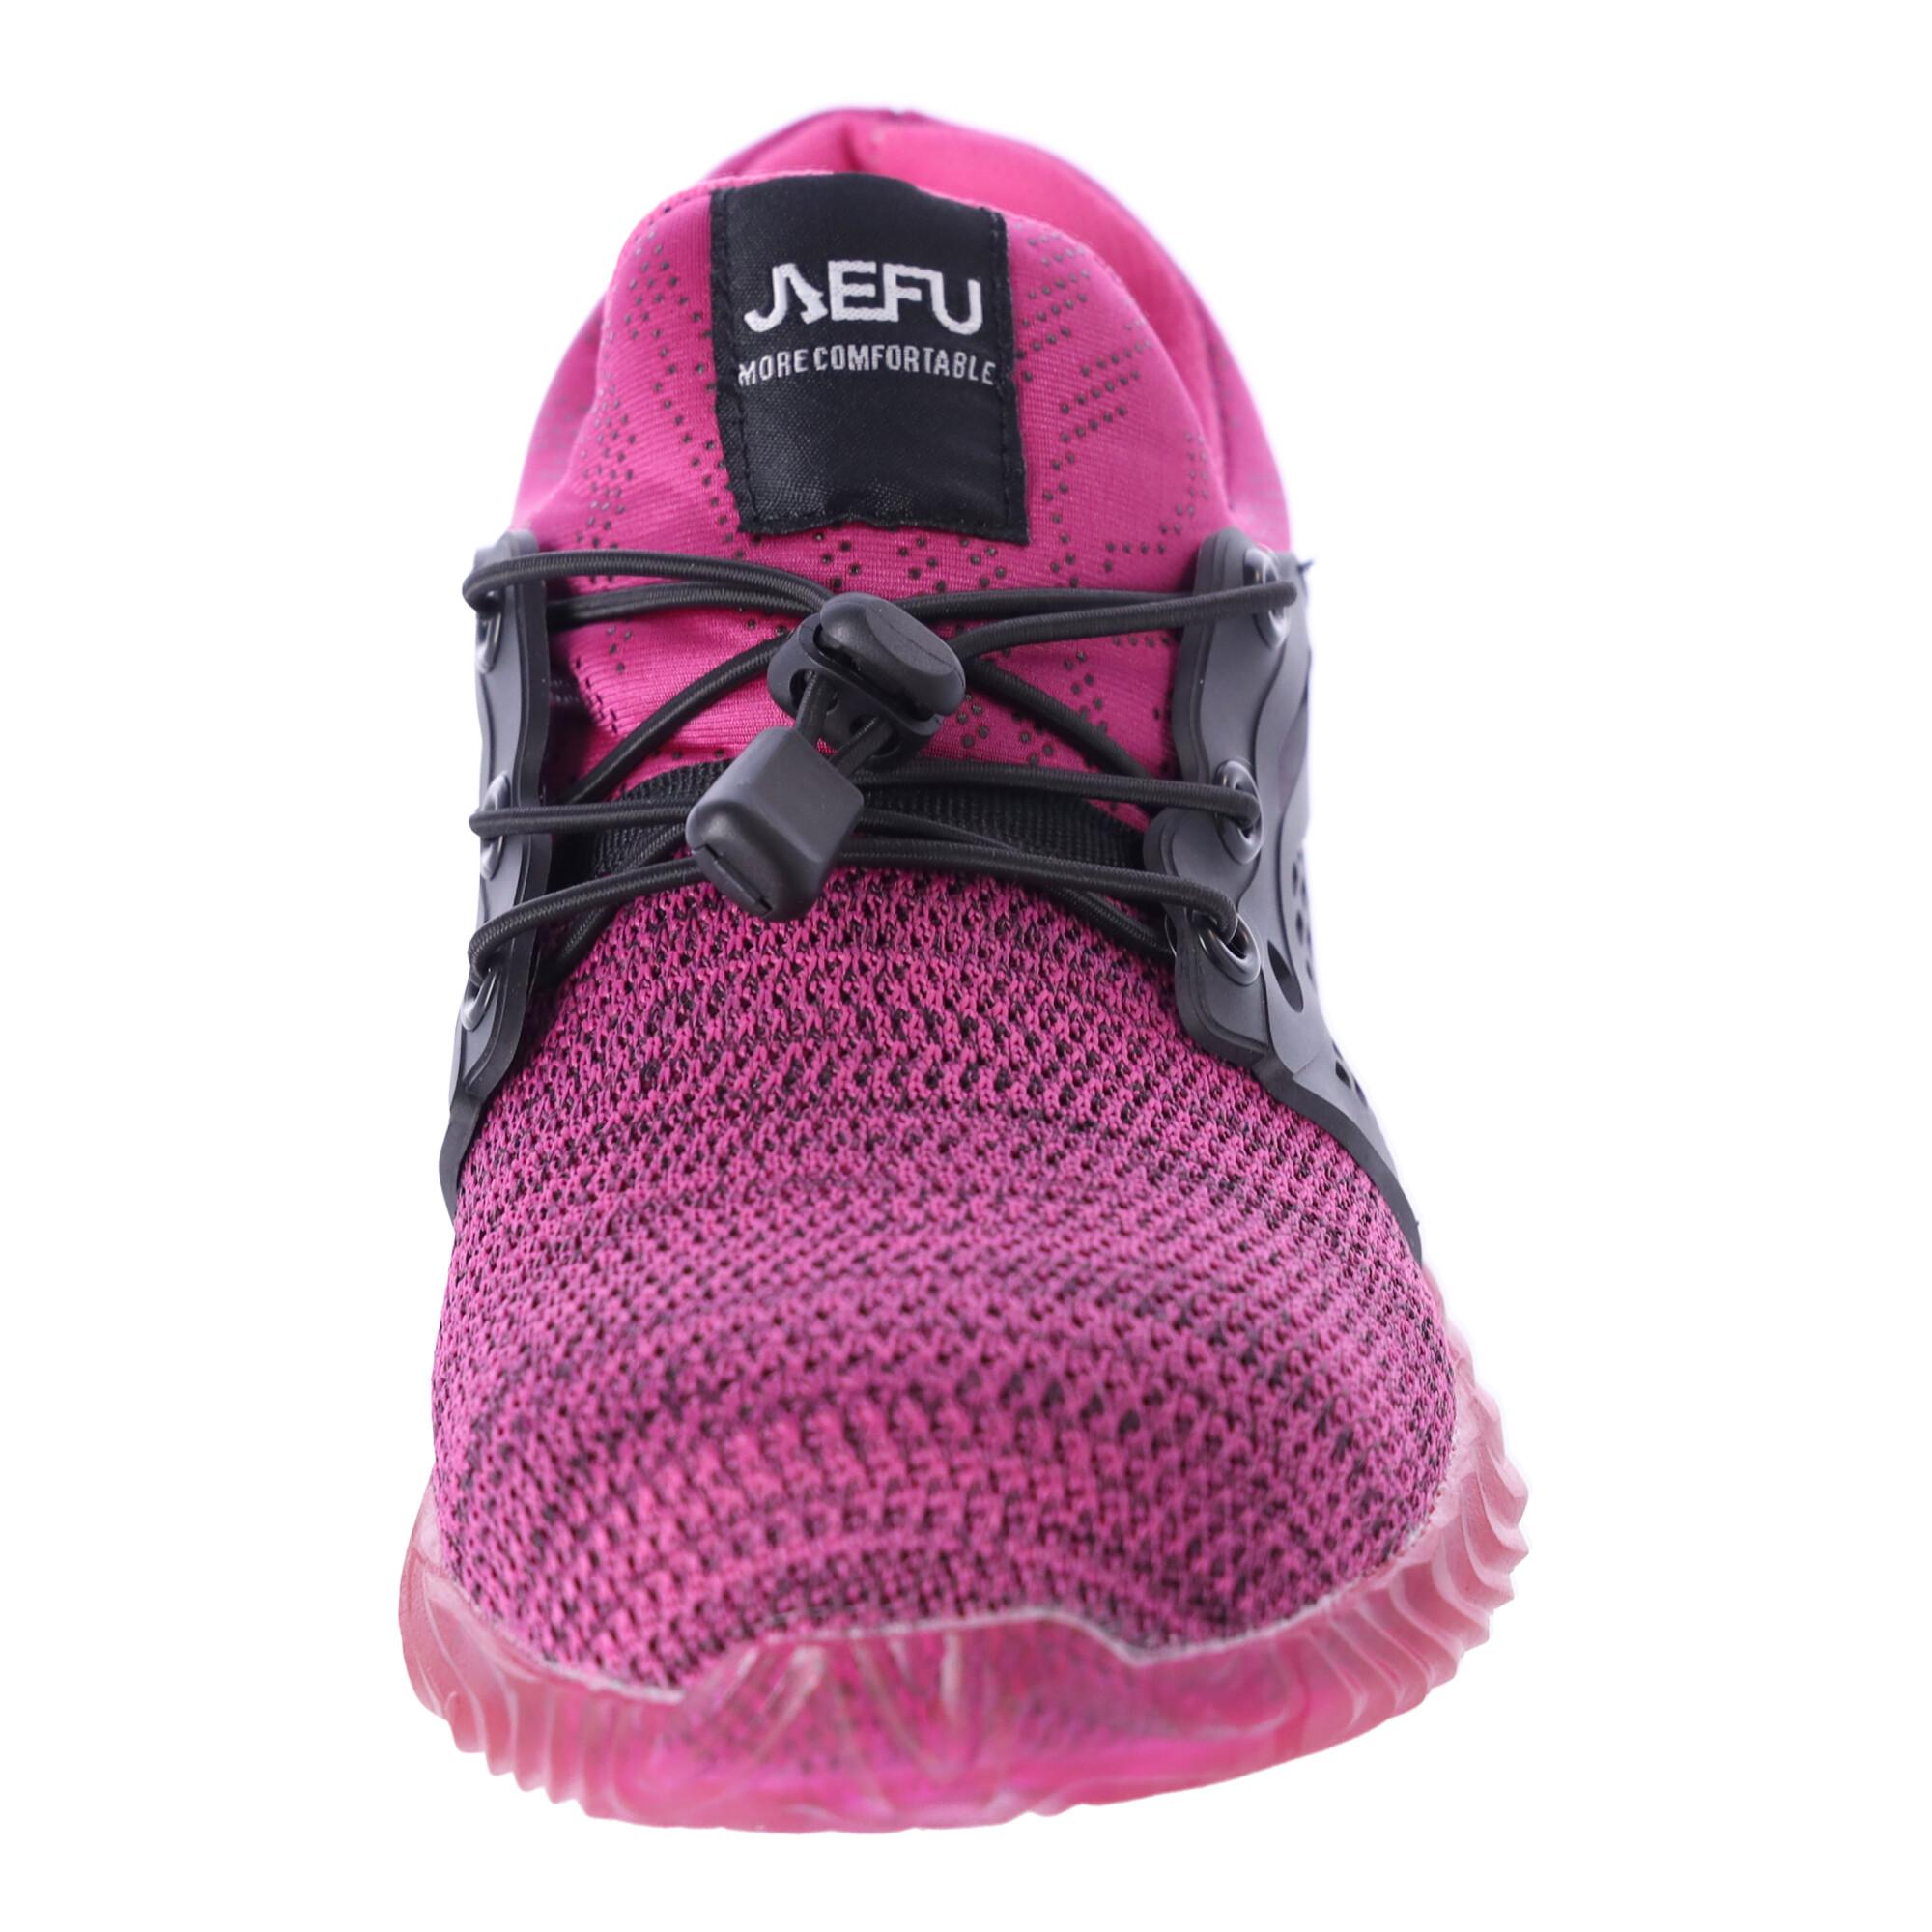 Work safety shoes "41" - pink